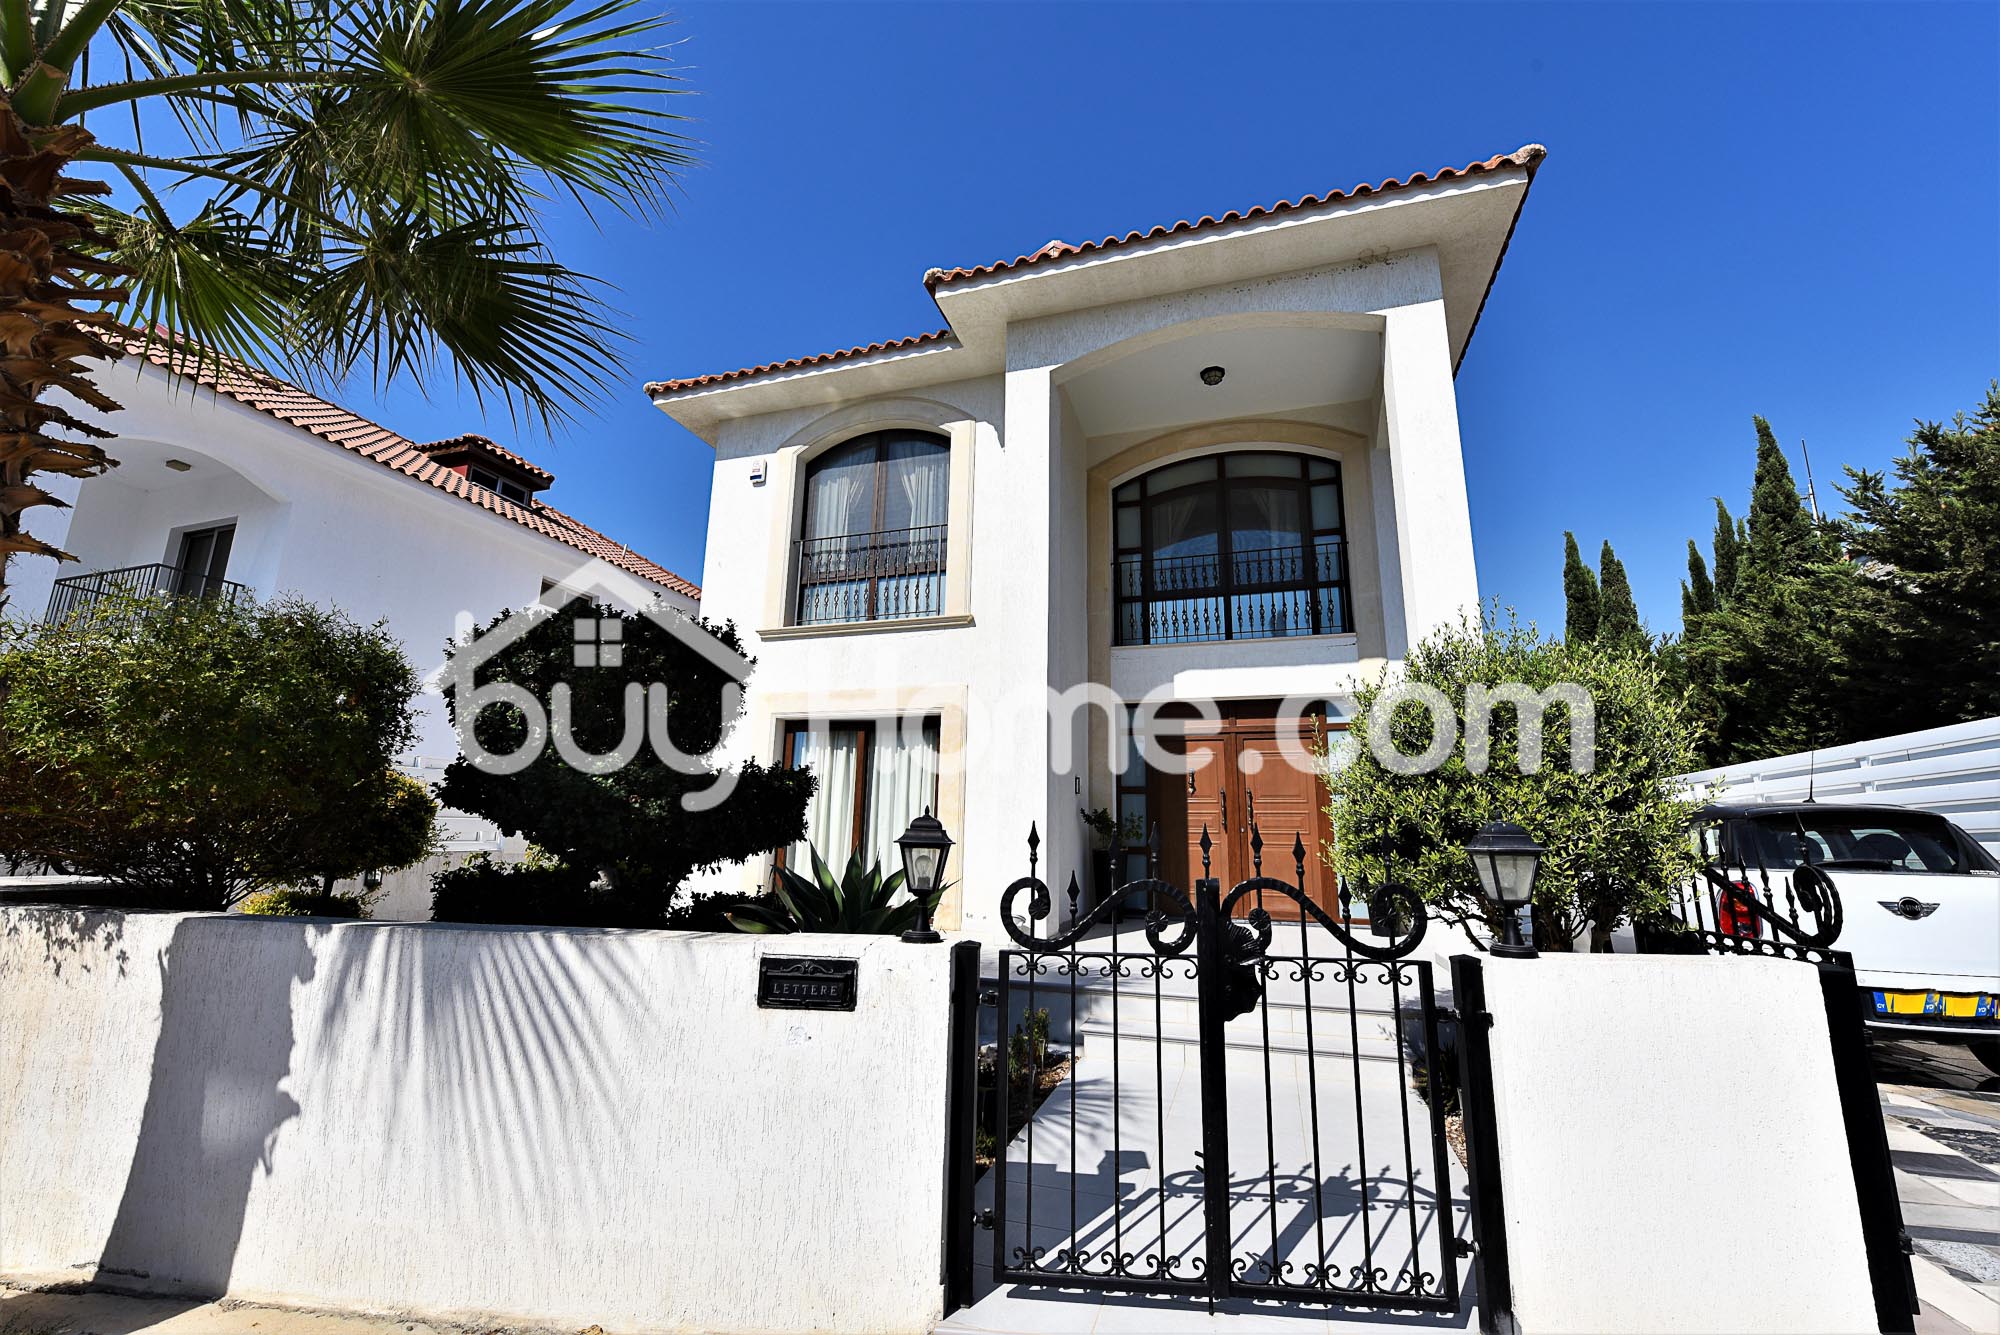 Deluxe Villa with Private Pool | BuyHome